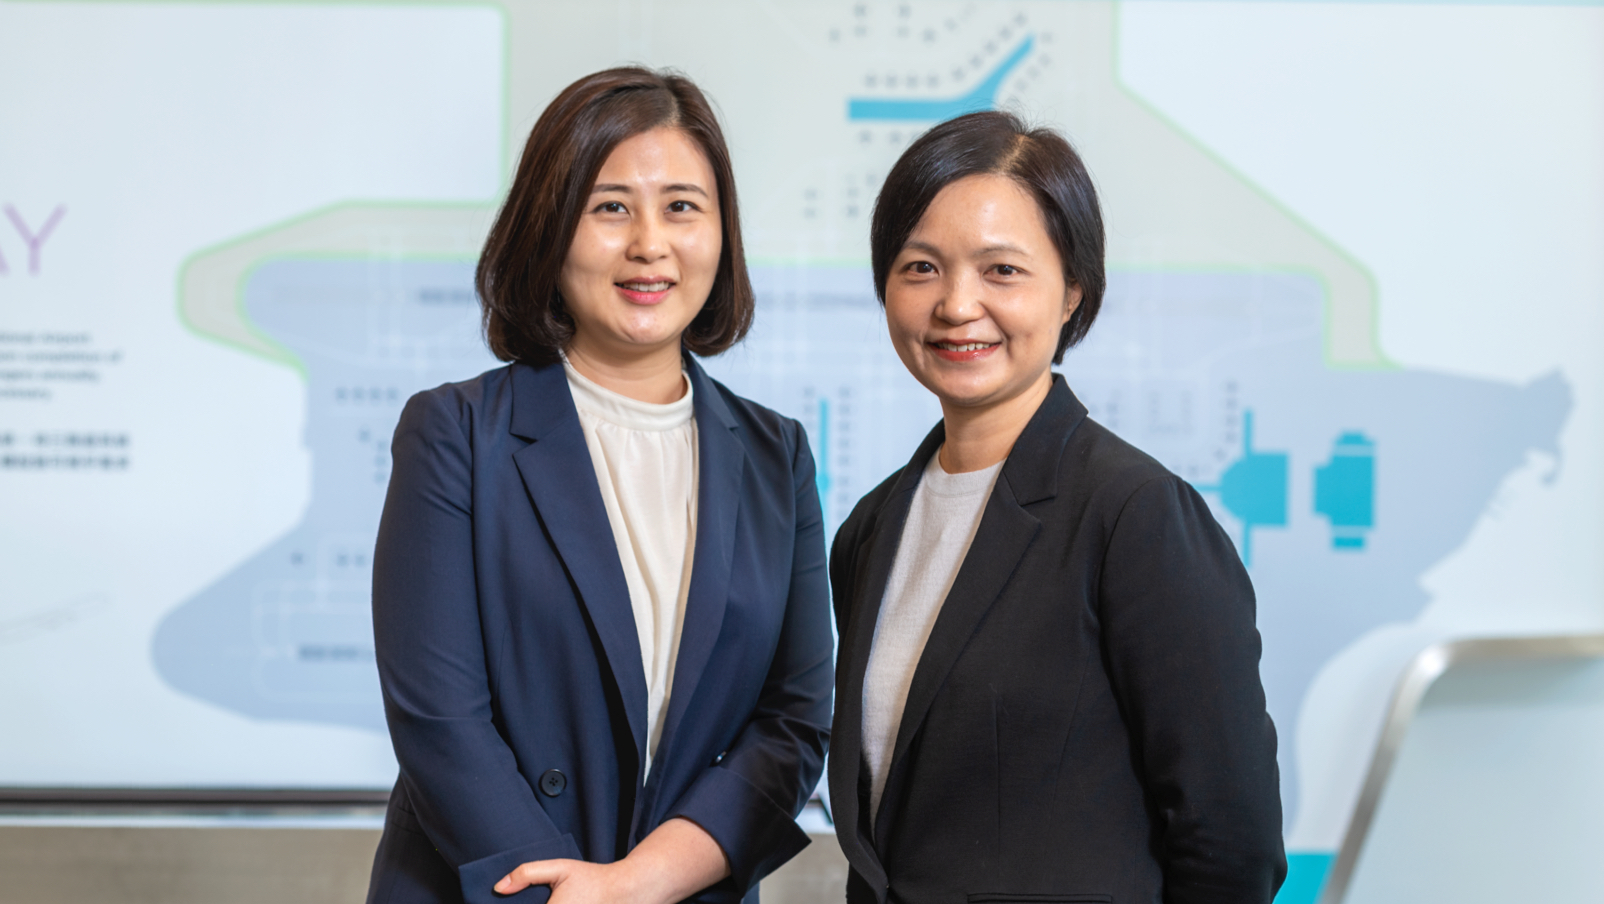 Melody Yeung, Manager, Organization Development (left) and Queena Pun, General Manager, HR Relationship Management (right)